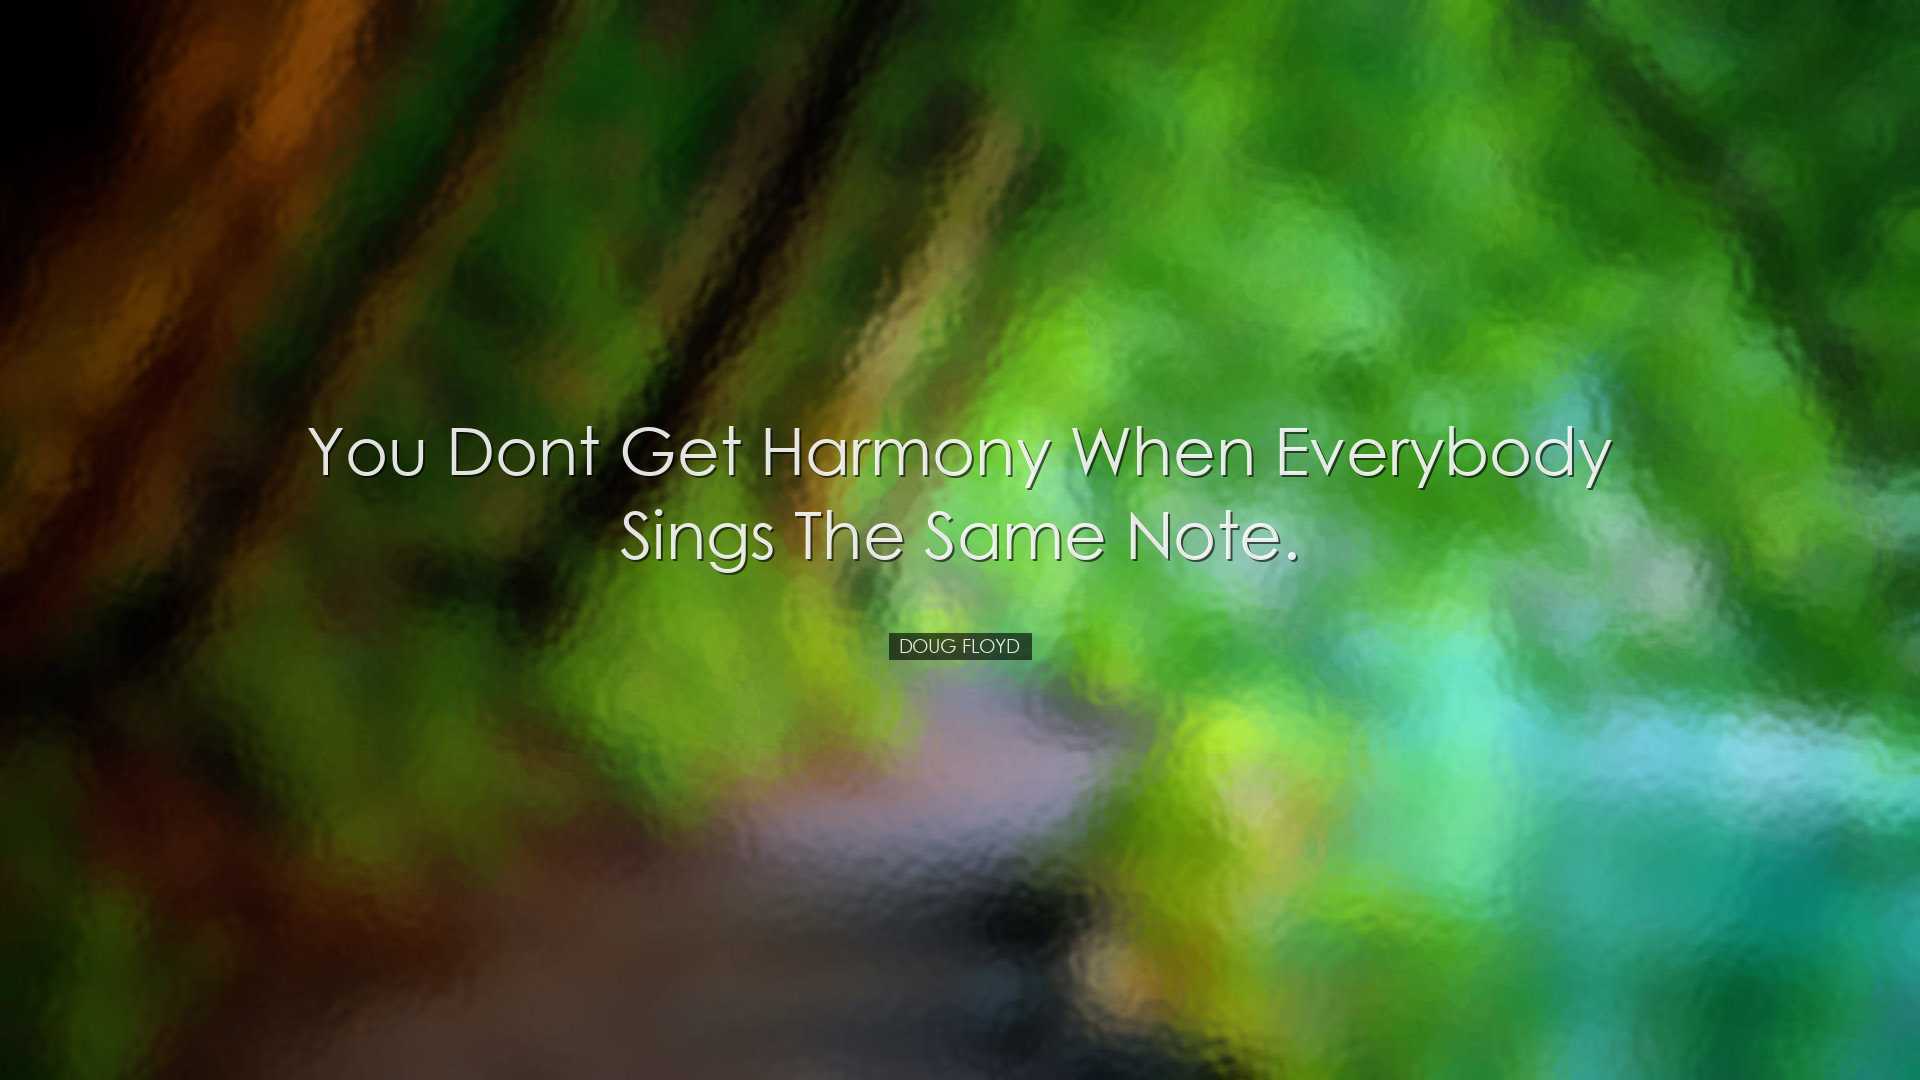 You dont get harmony when everybody sings the same note. - Doug Fl